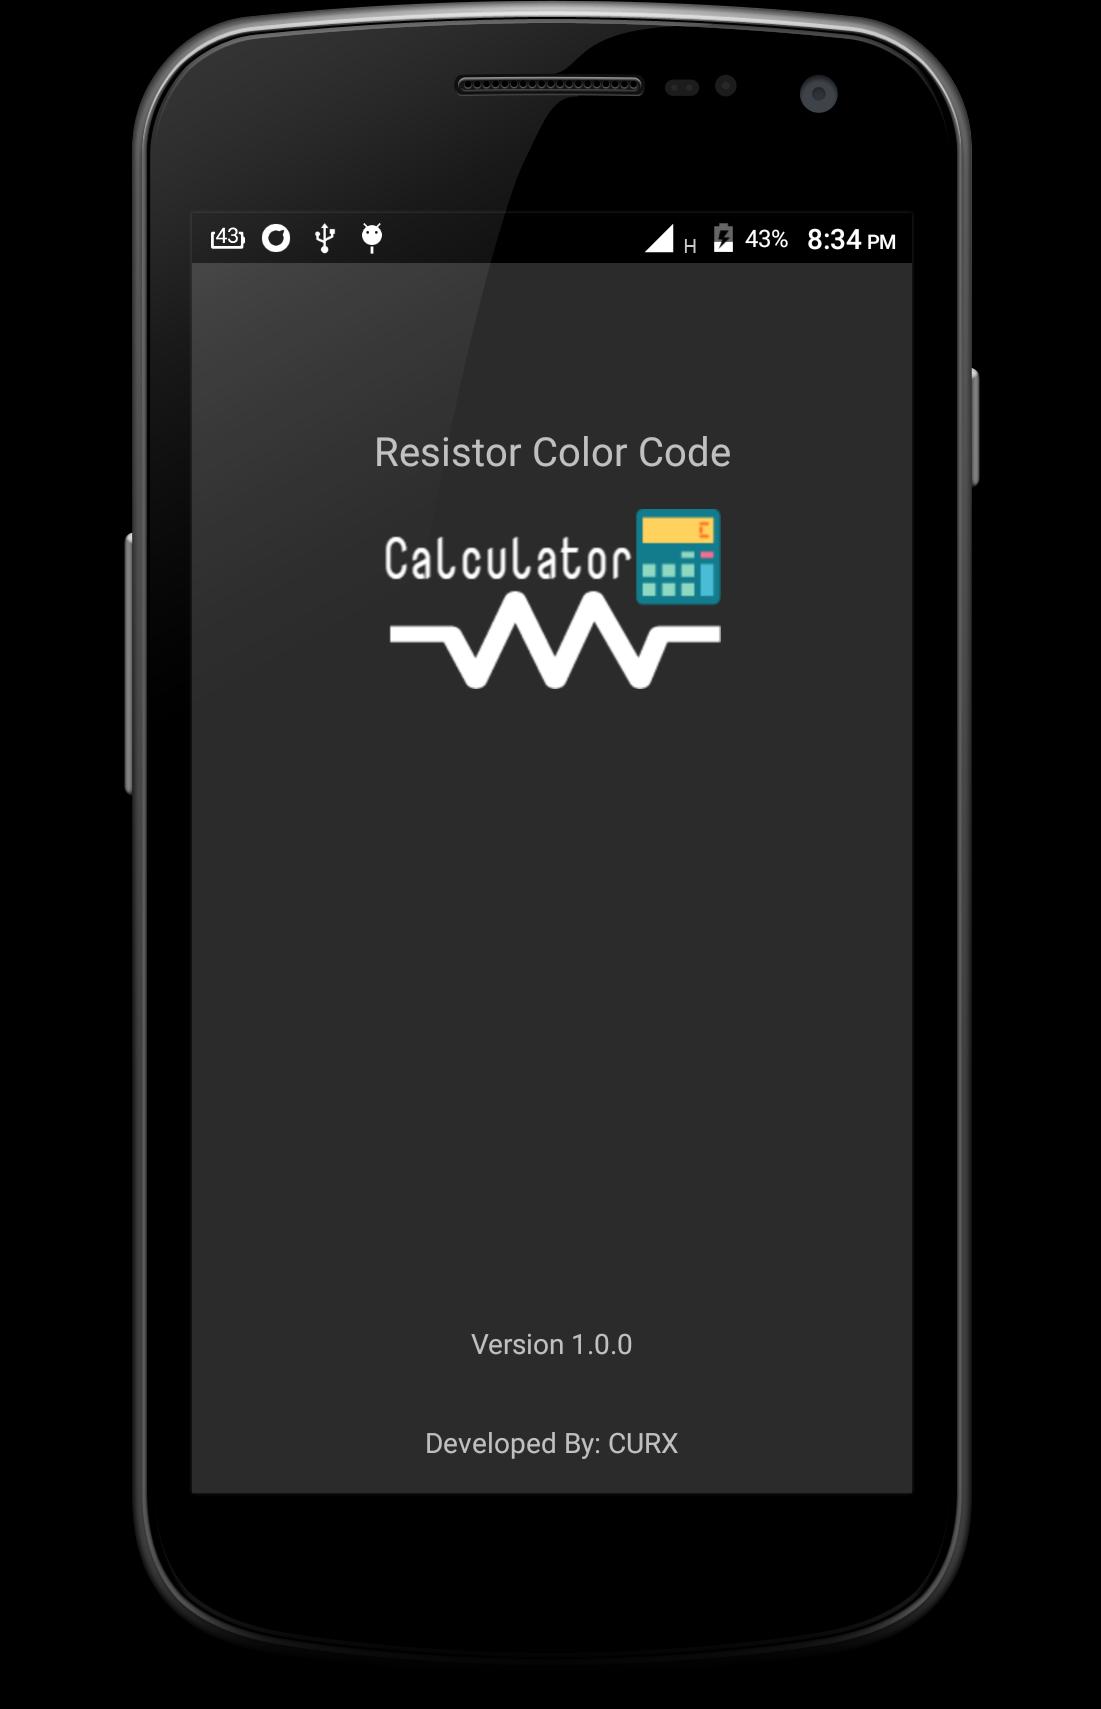 Resistor Color Code Calculator For Android Apk Download - pokemon galaxy codes for roblox